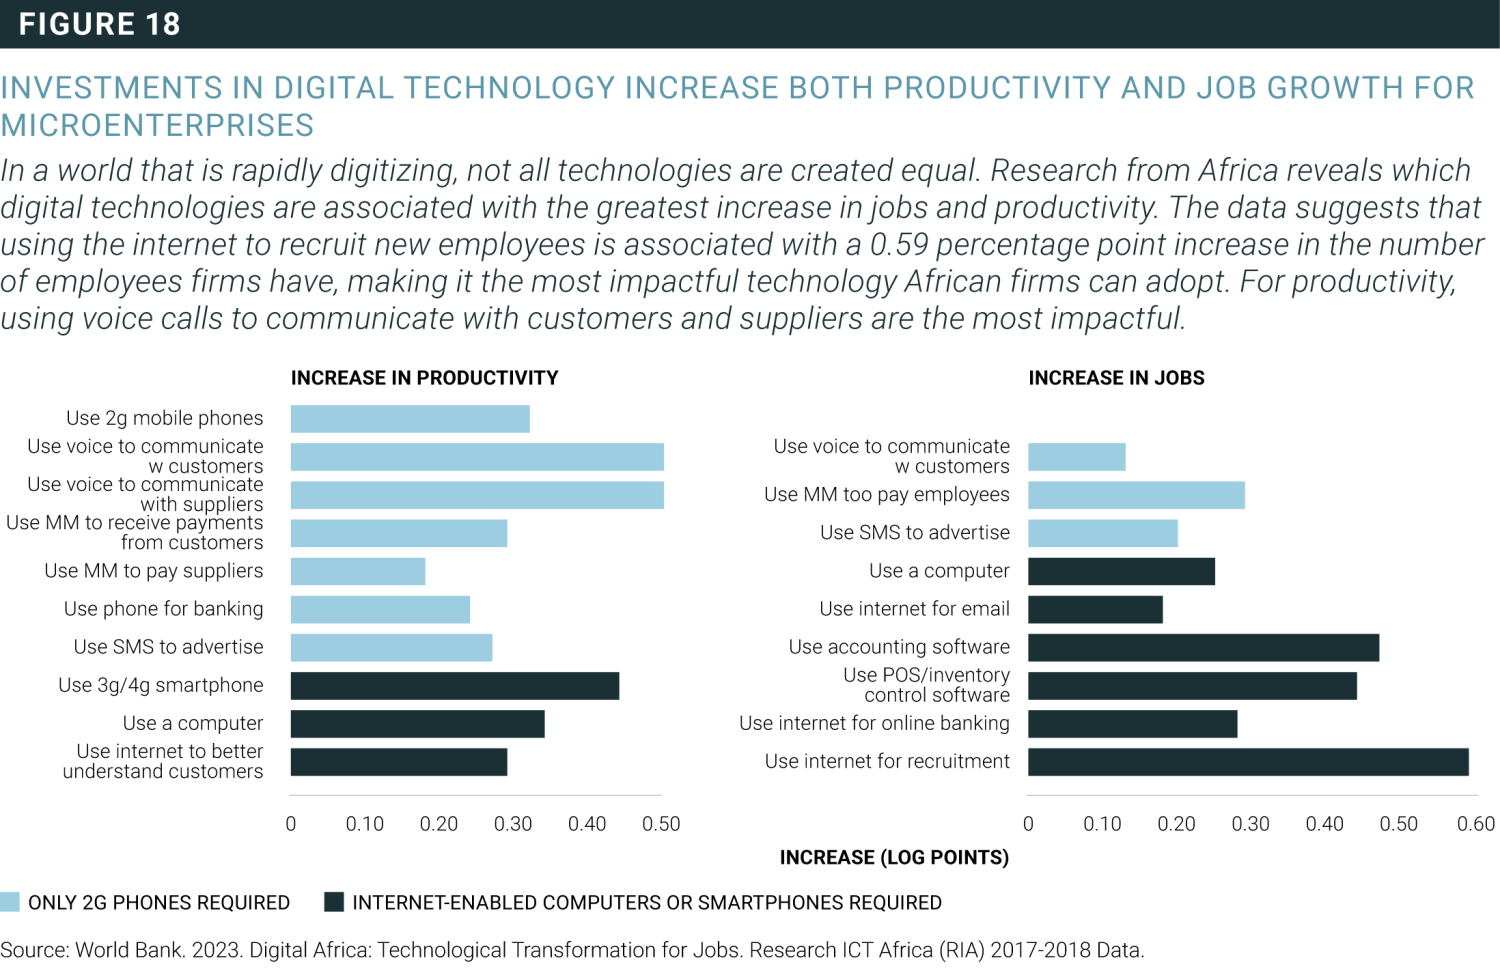 Investments in digital technology increase both productivity and job growth for microenterprises